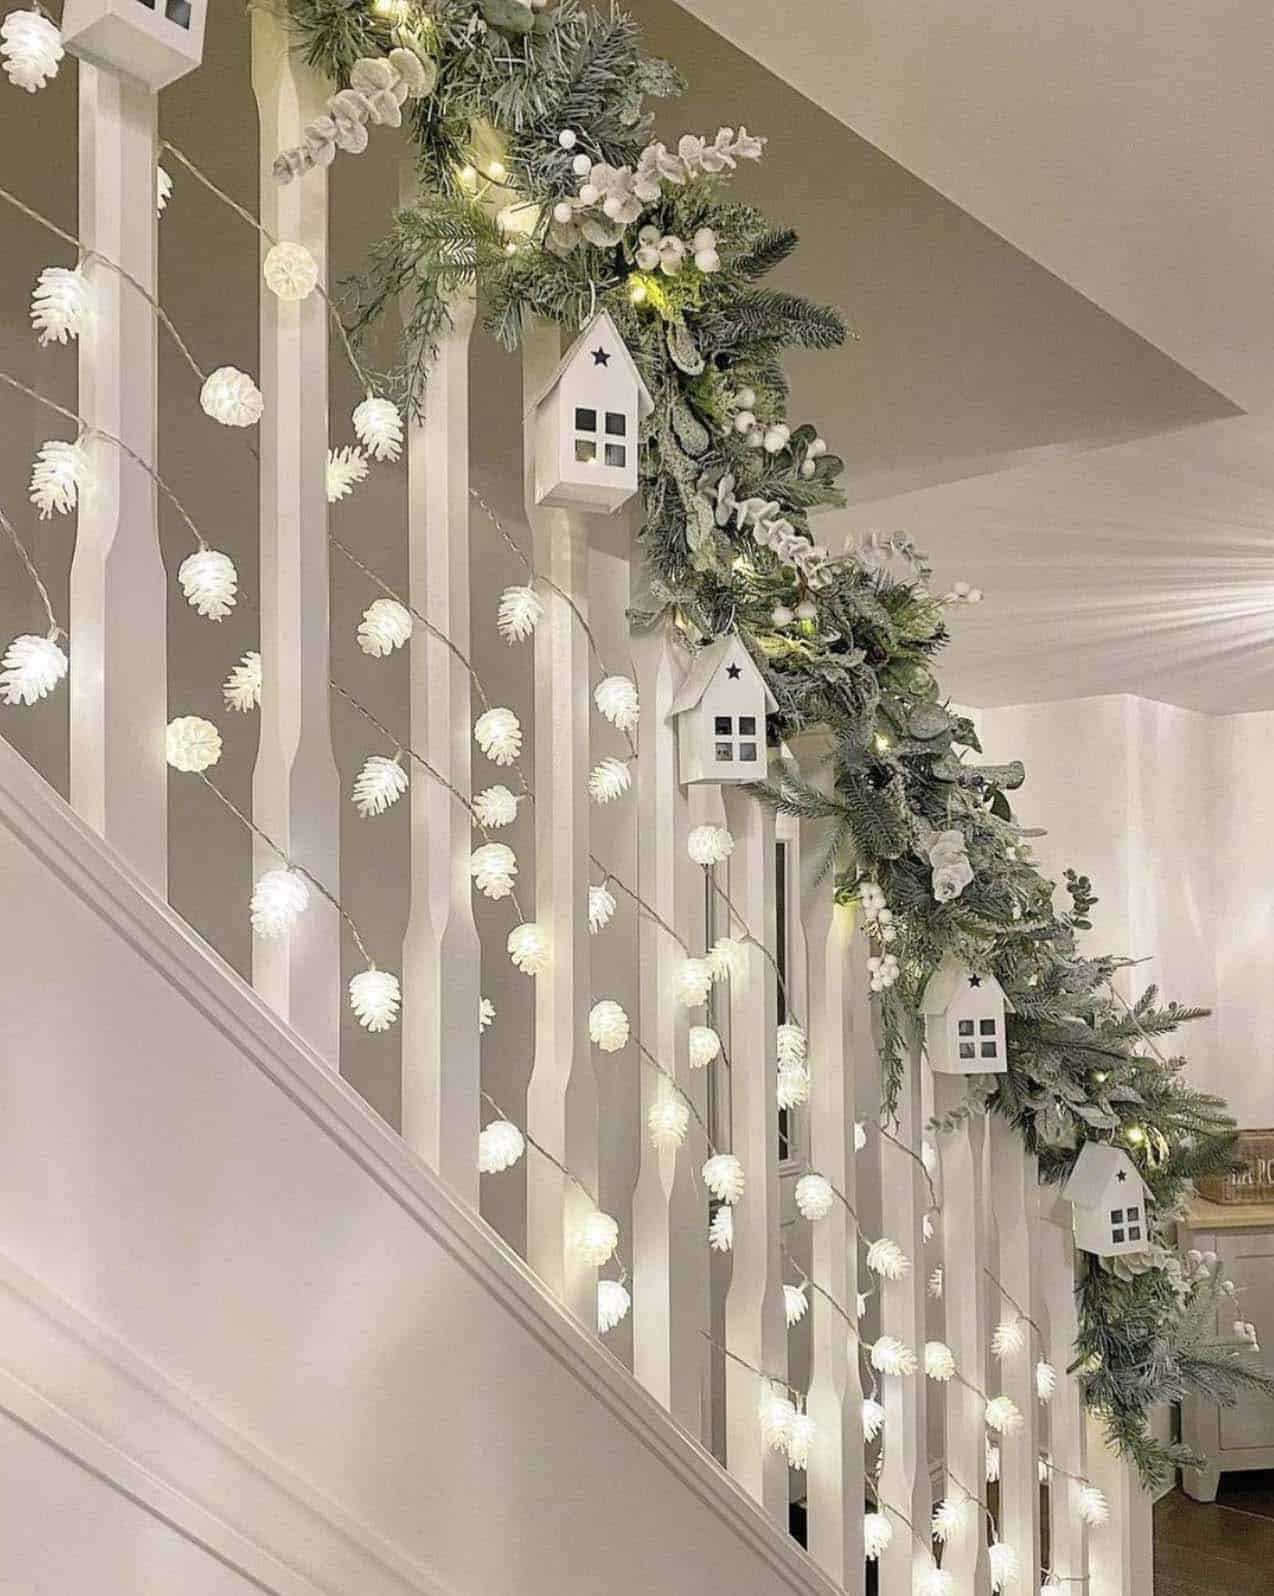 staircase-garland-with-string-lights-and-houses-christmas